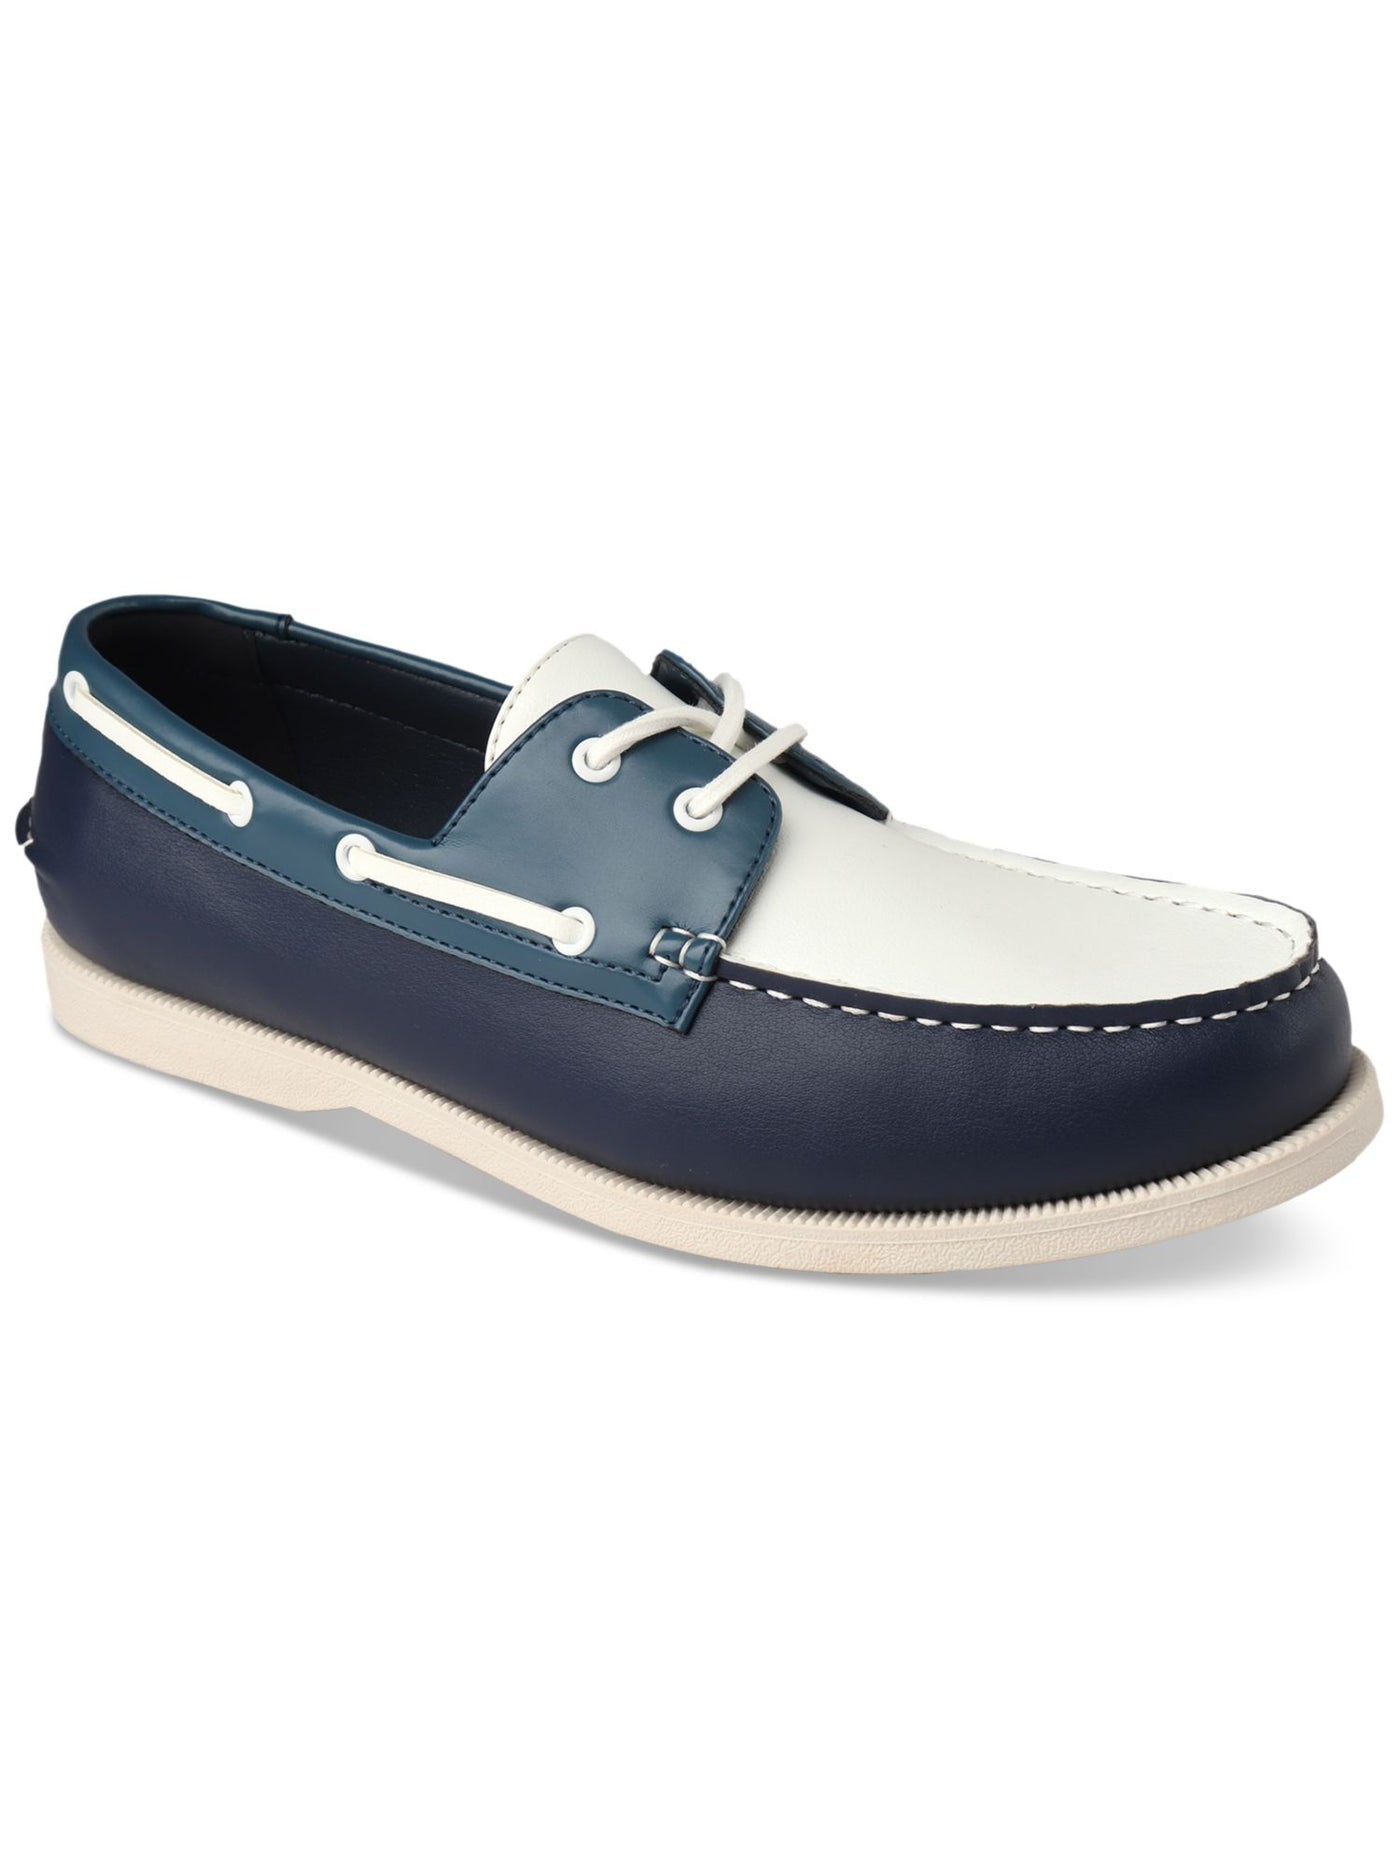 CLUBROOM Mens Navy Moc Toe Comfort Elliot Round Toe Lace-Up Boat Shoes 9 M